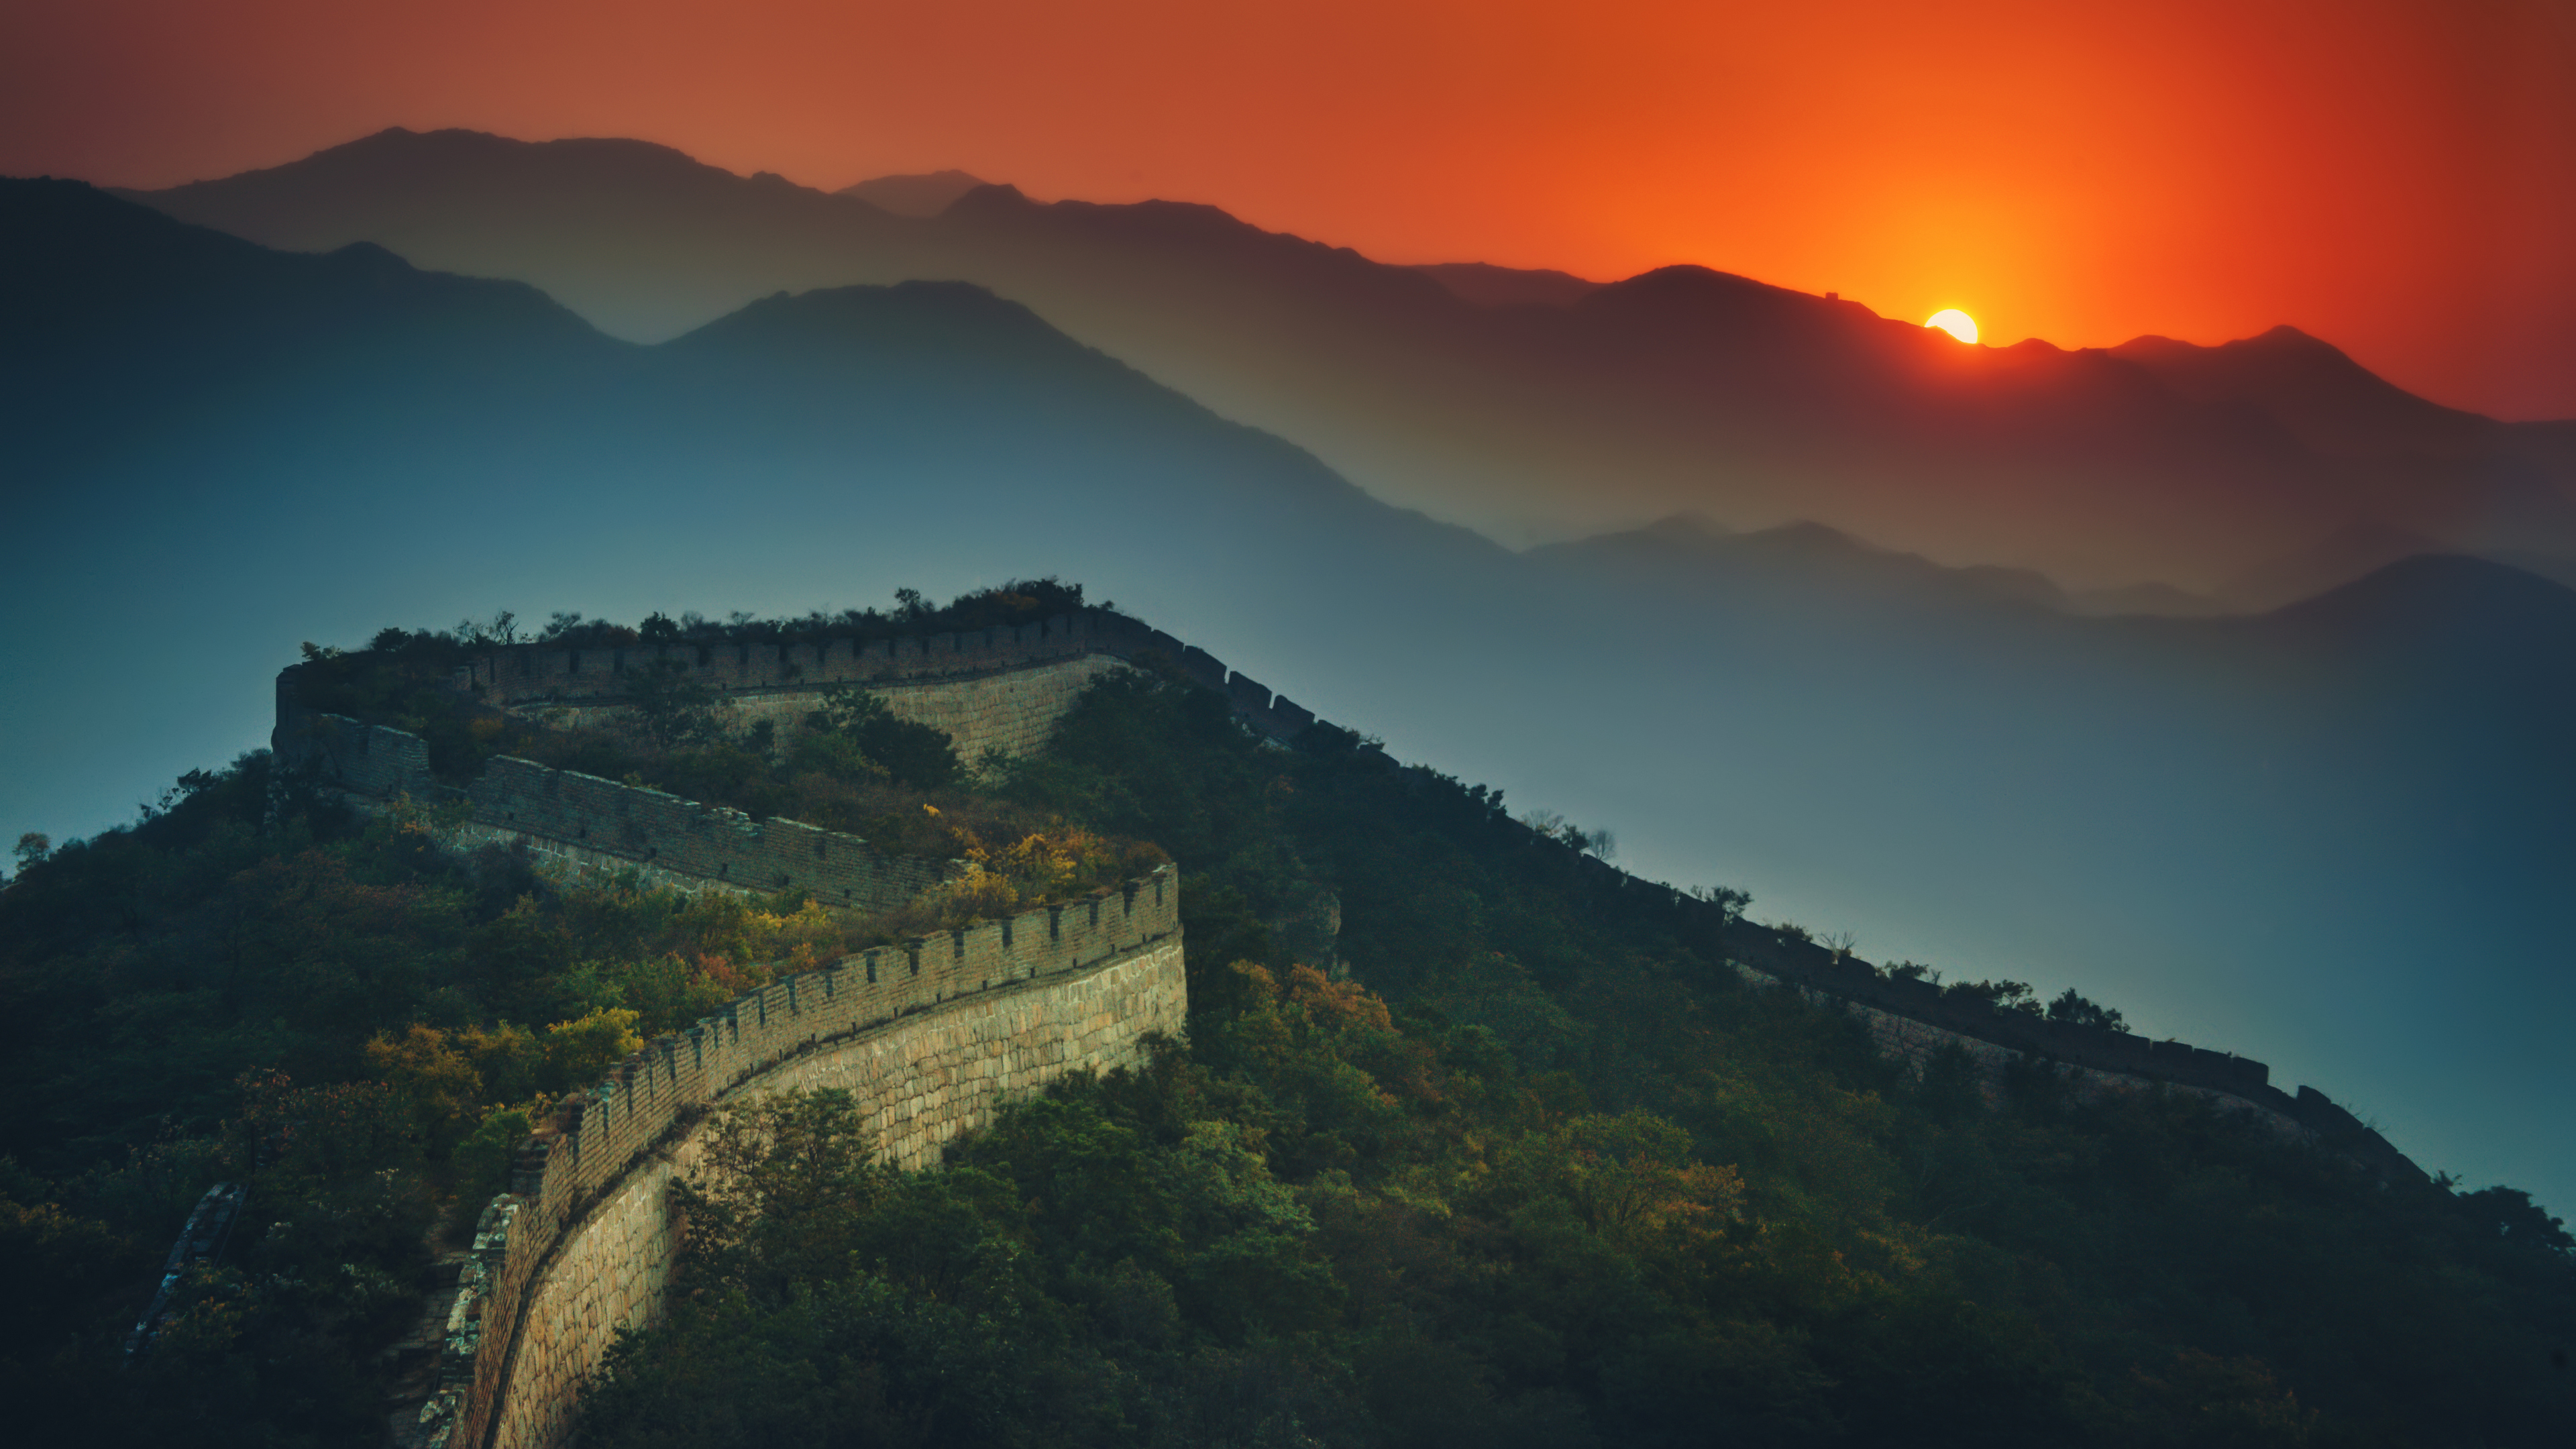 General 3840x2160 landscape 4K Great Wall of China sunset mountain top nature China